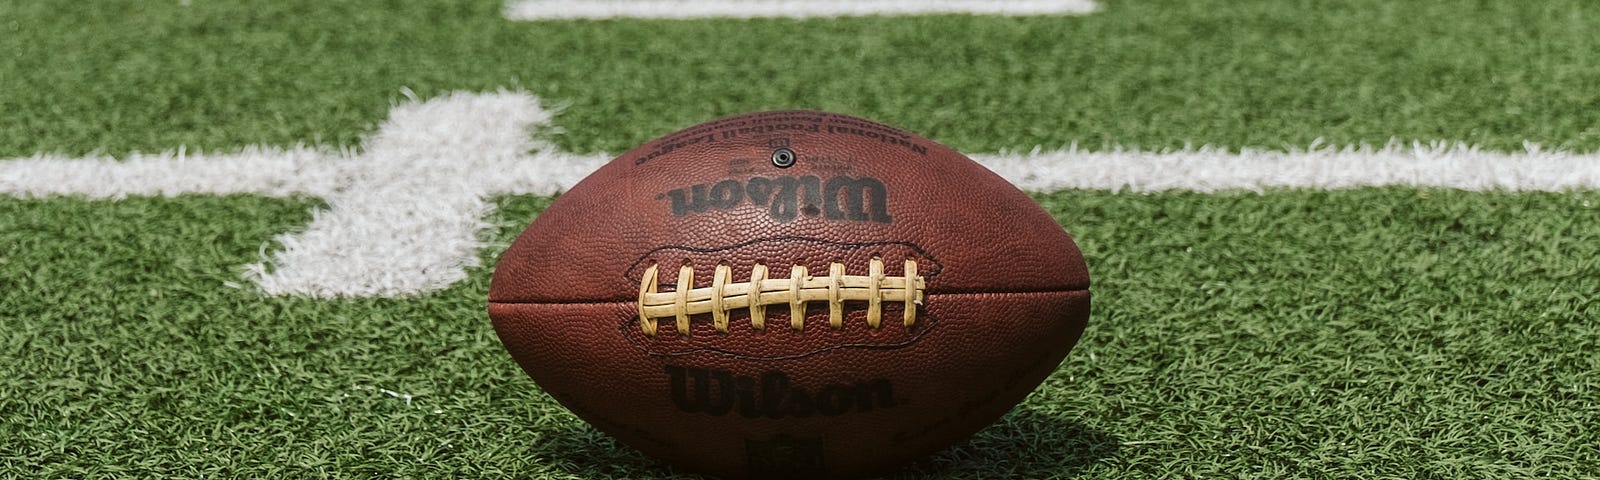 A brown football on a green field.